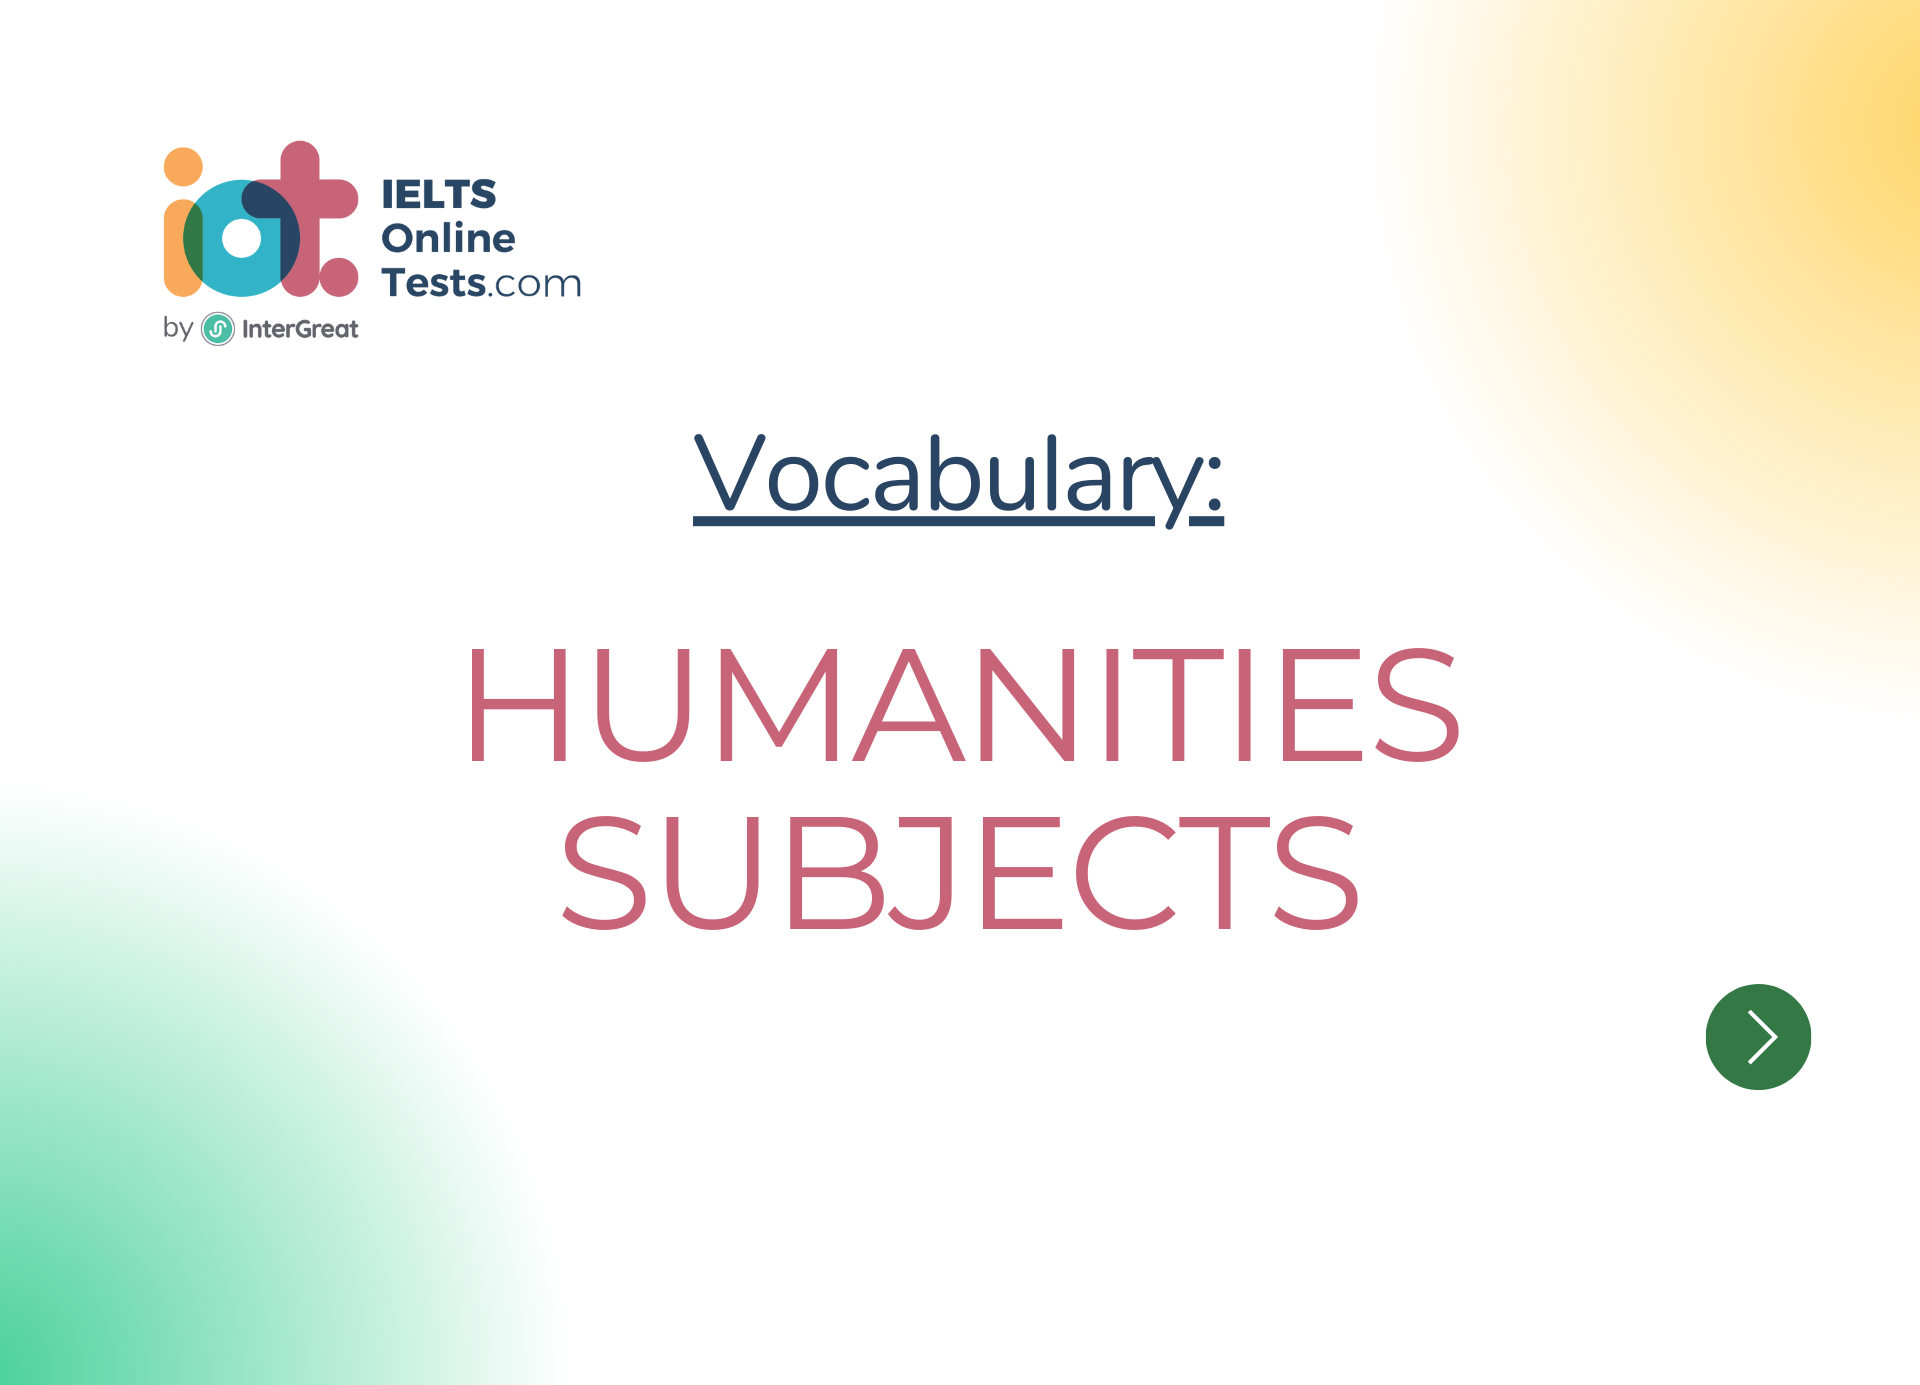 Humanities subjects